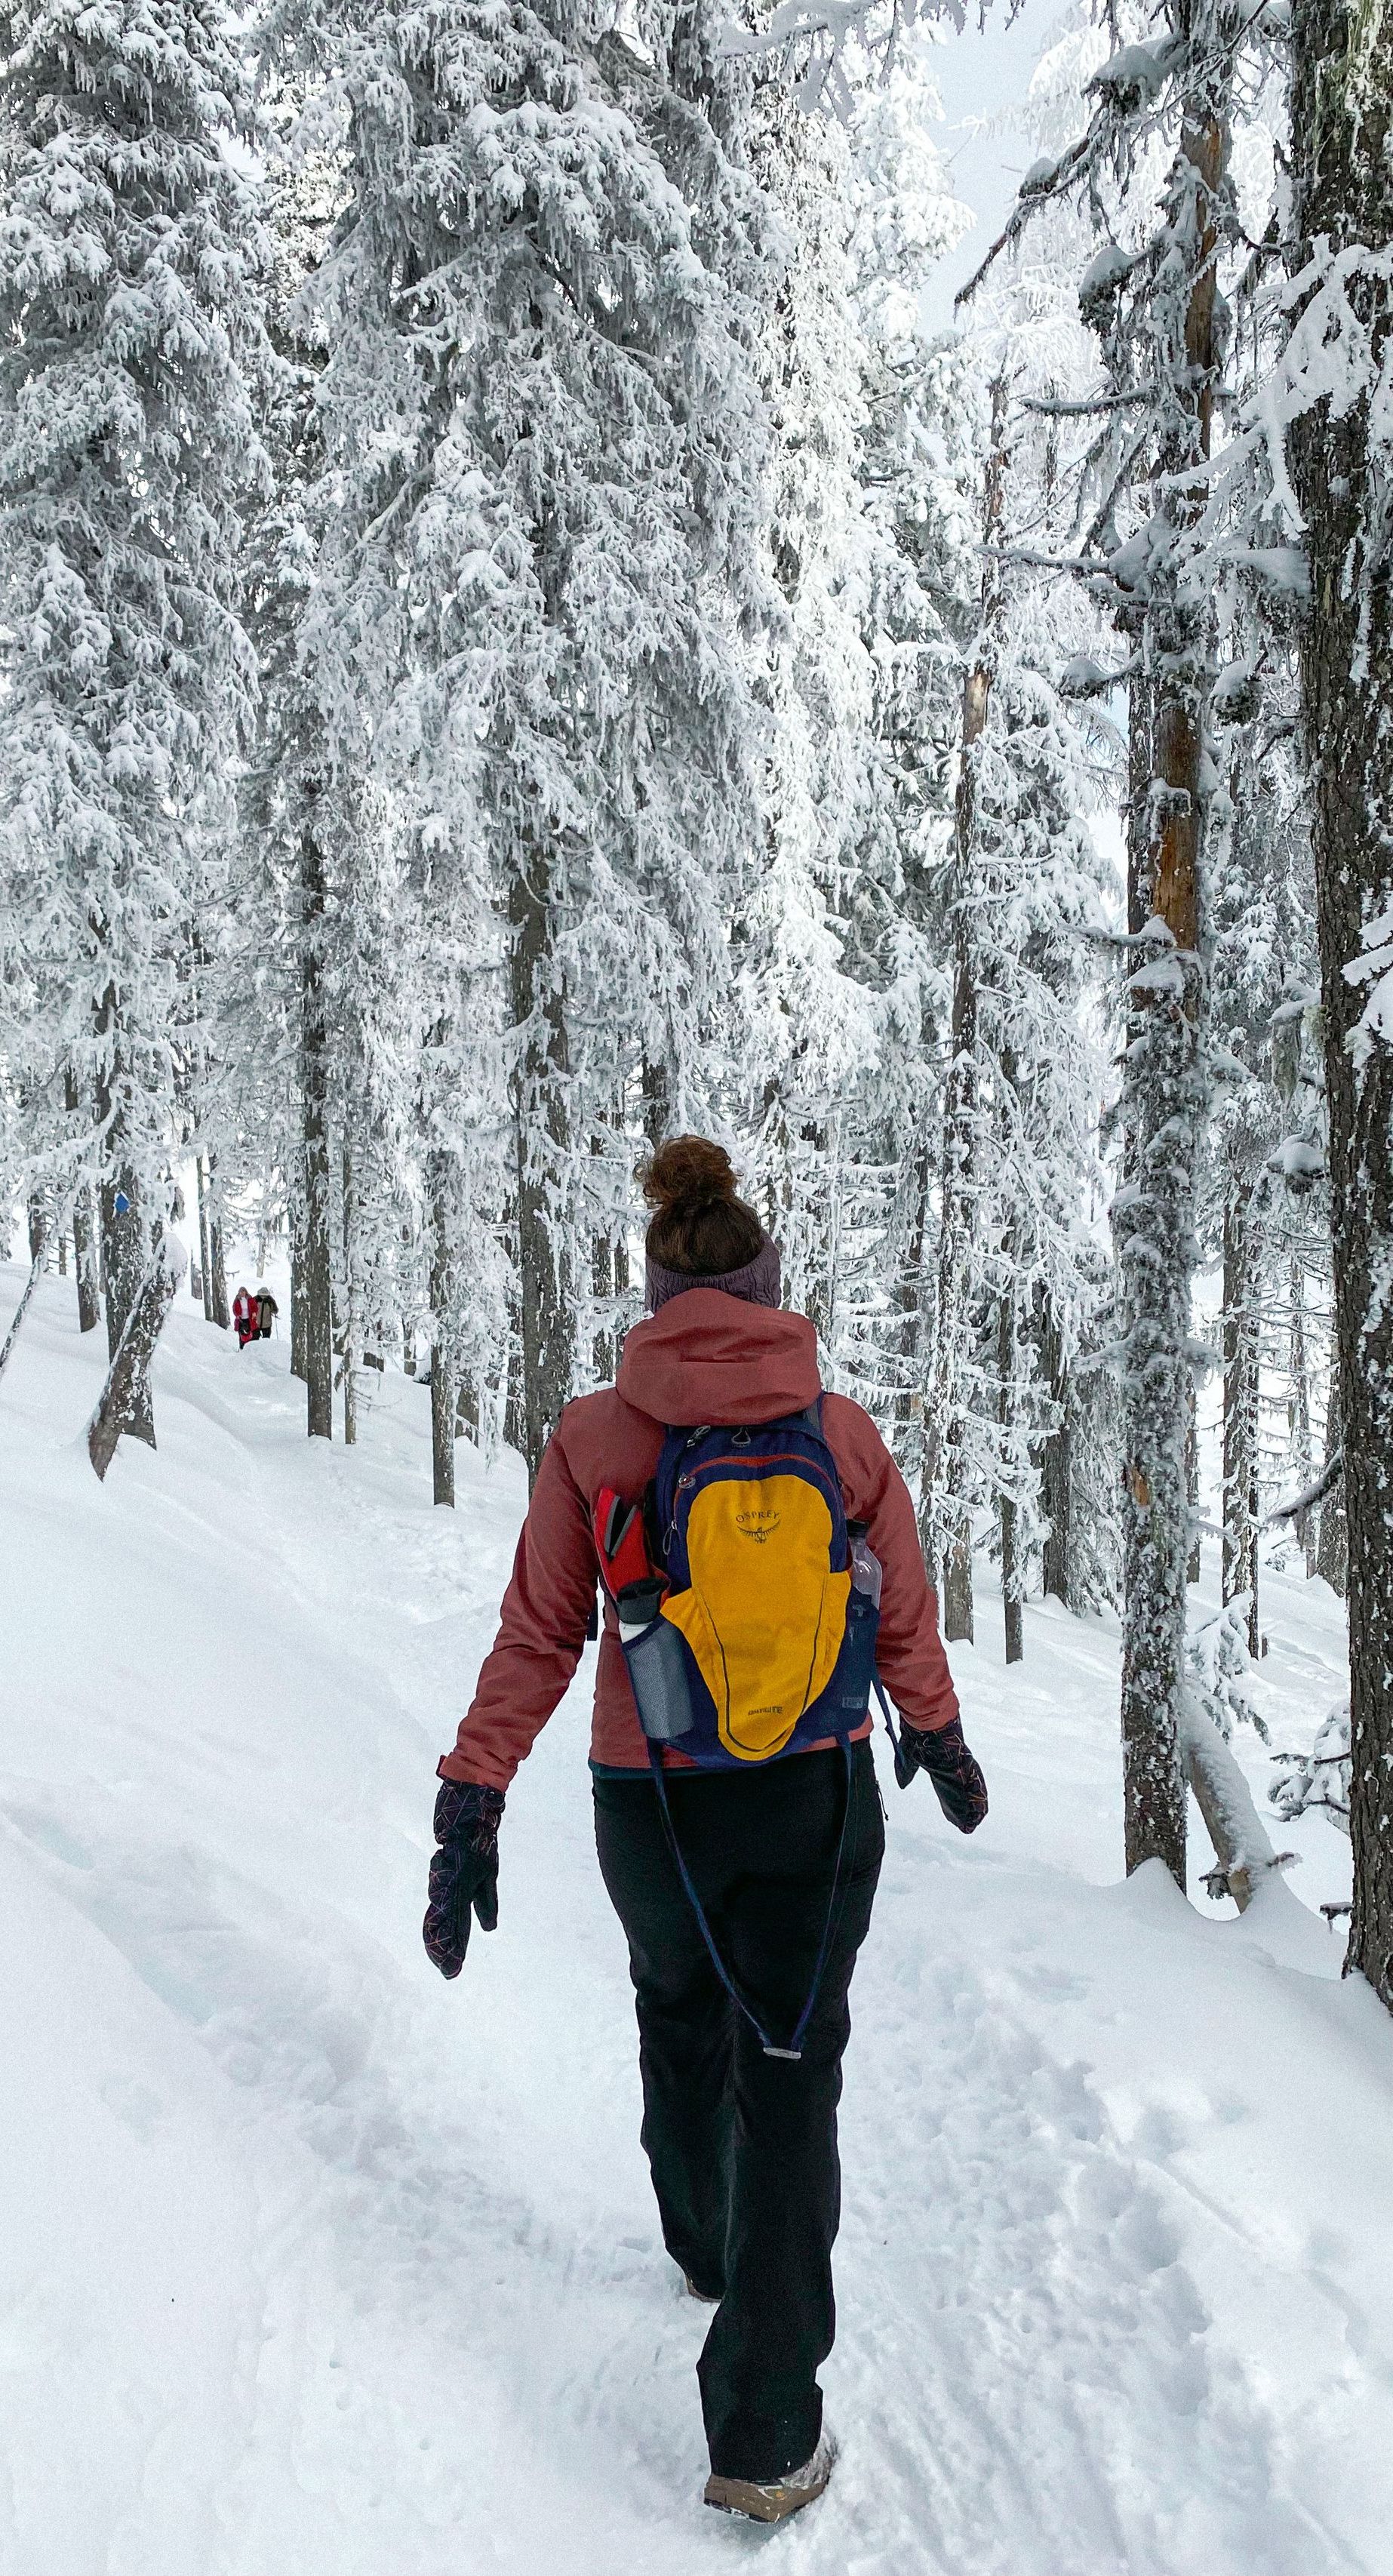 A person with a yellow backpack is walking through a snowy forest